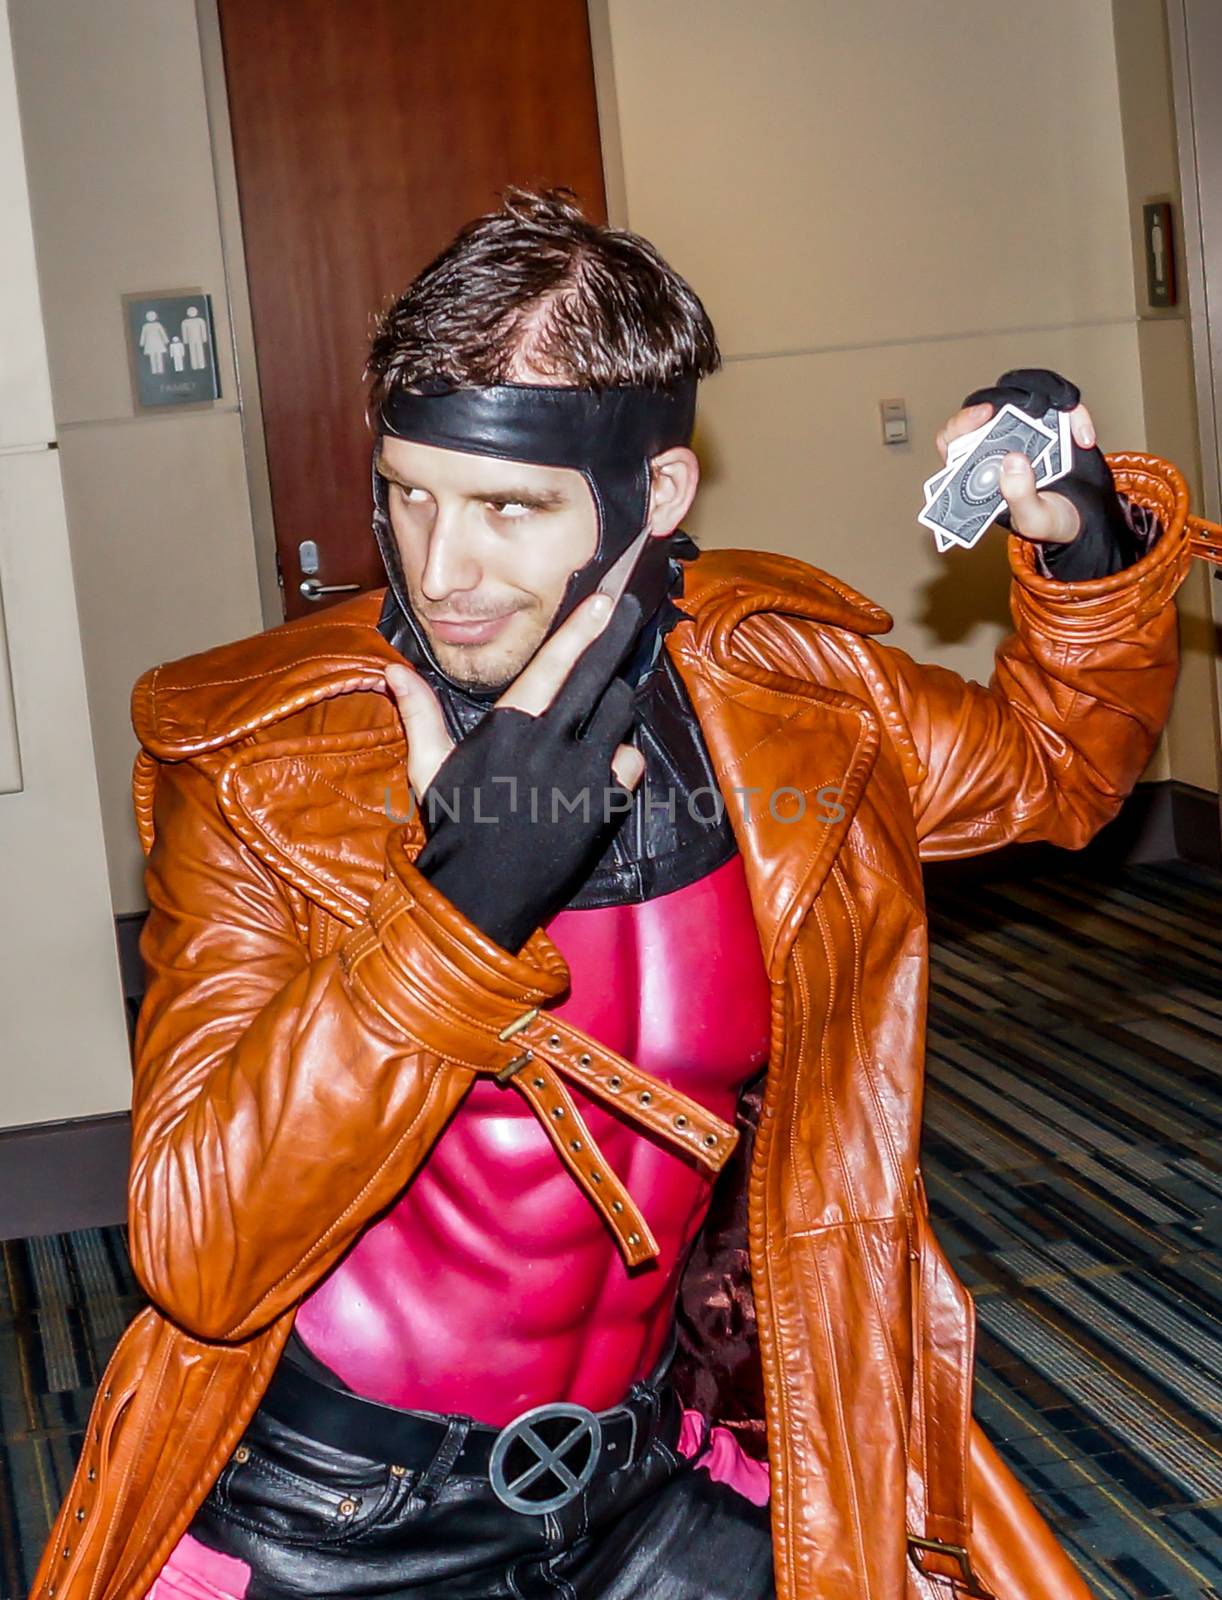 Raleigh, NC, USA - May 24, 2014: Animazement 2014 anime convention attendee cosplayer at the Raleigh Convention Center on May 24, 2014, in Raleigh, North Carolina